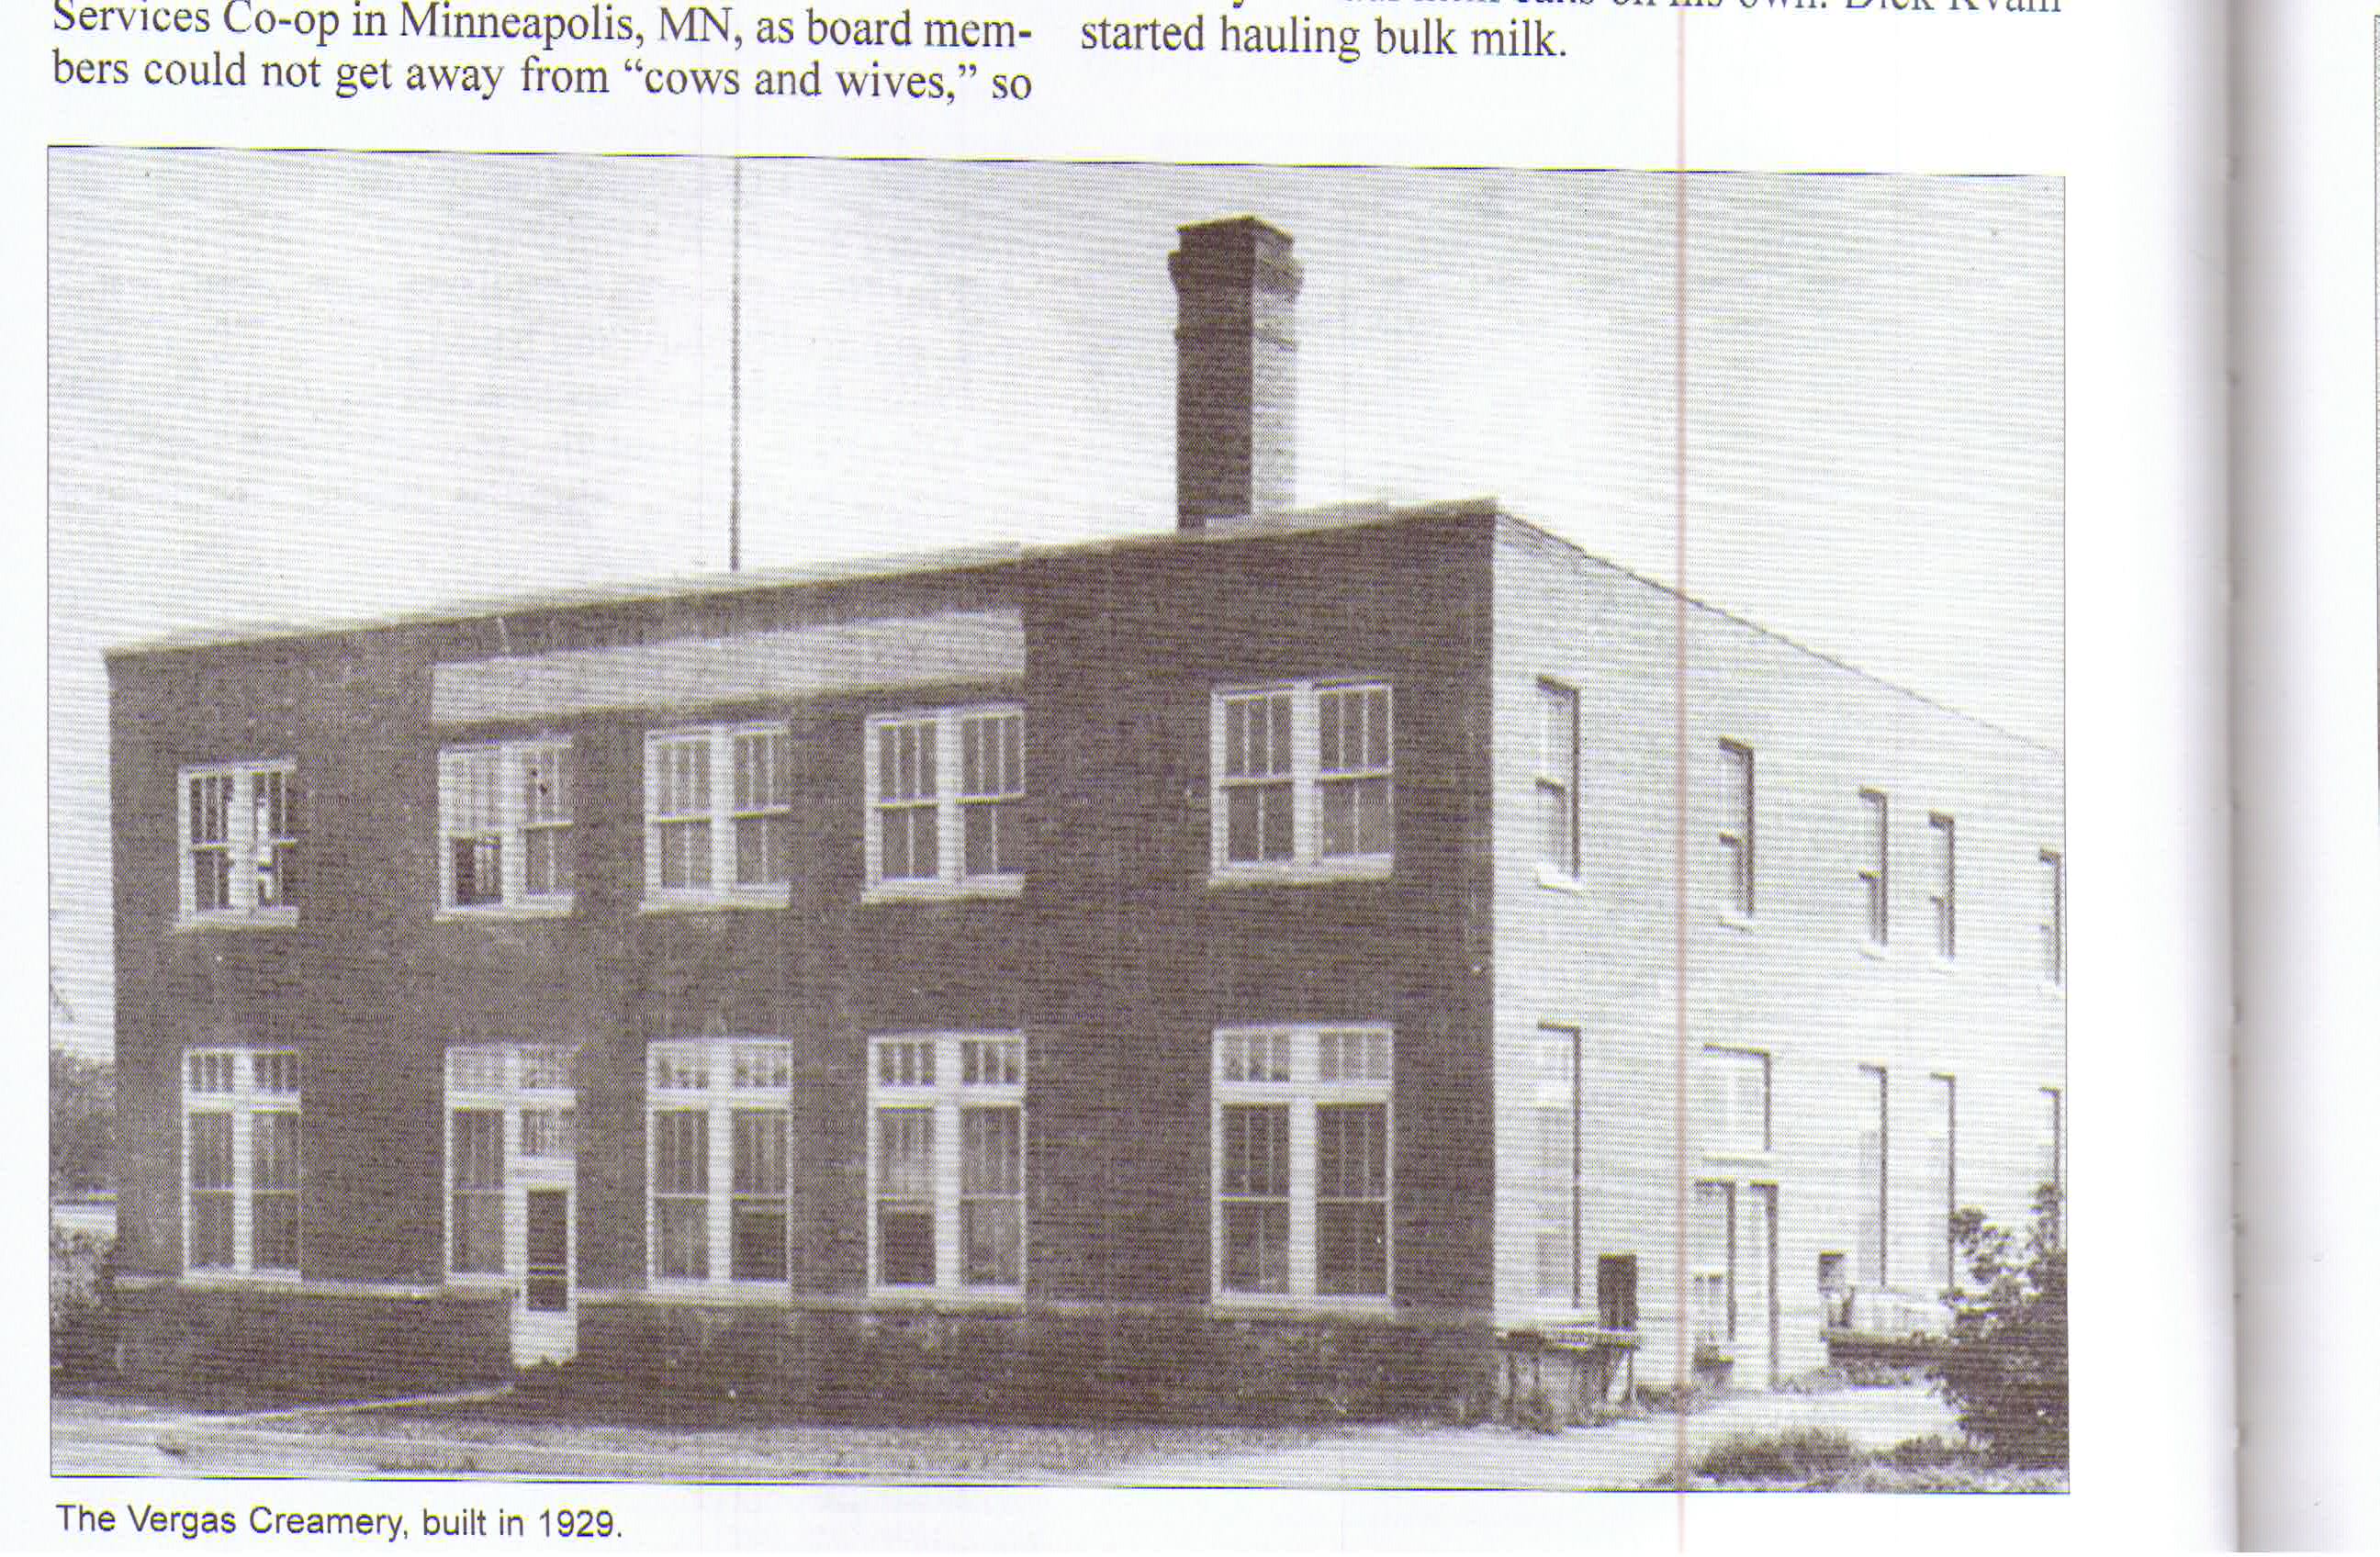 Historic photo of the Vergas Creamery building, now the Vergas Municipal building